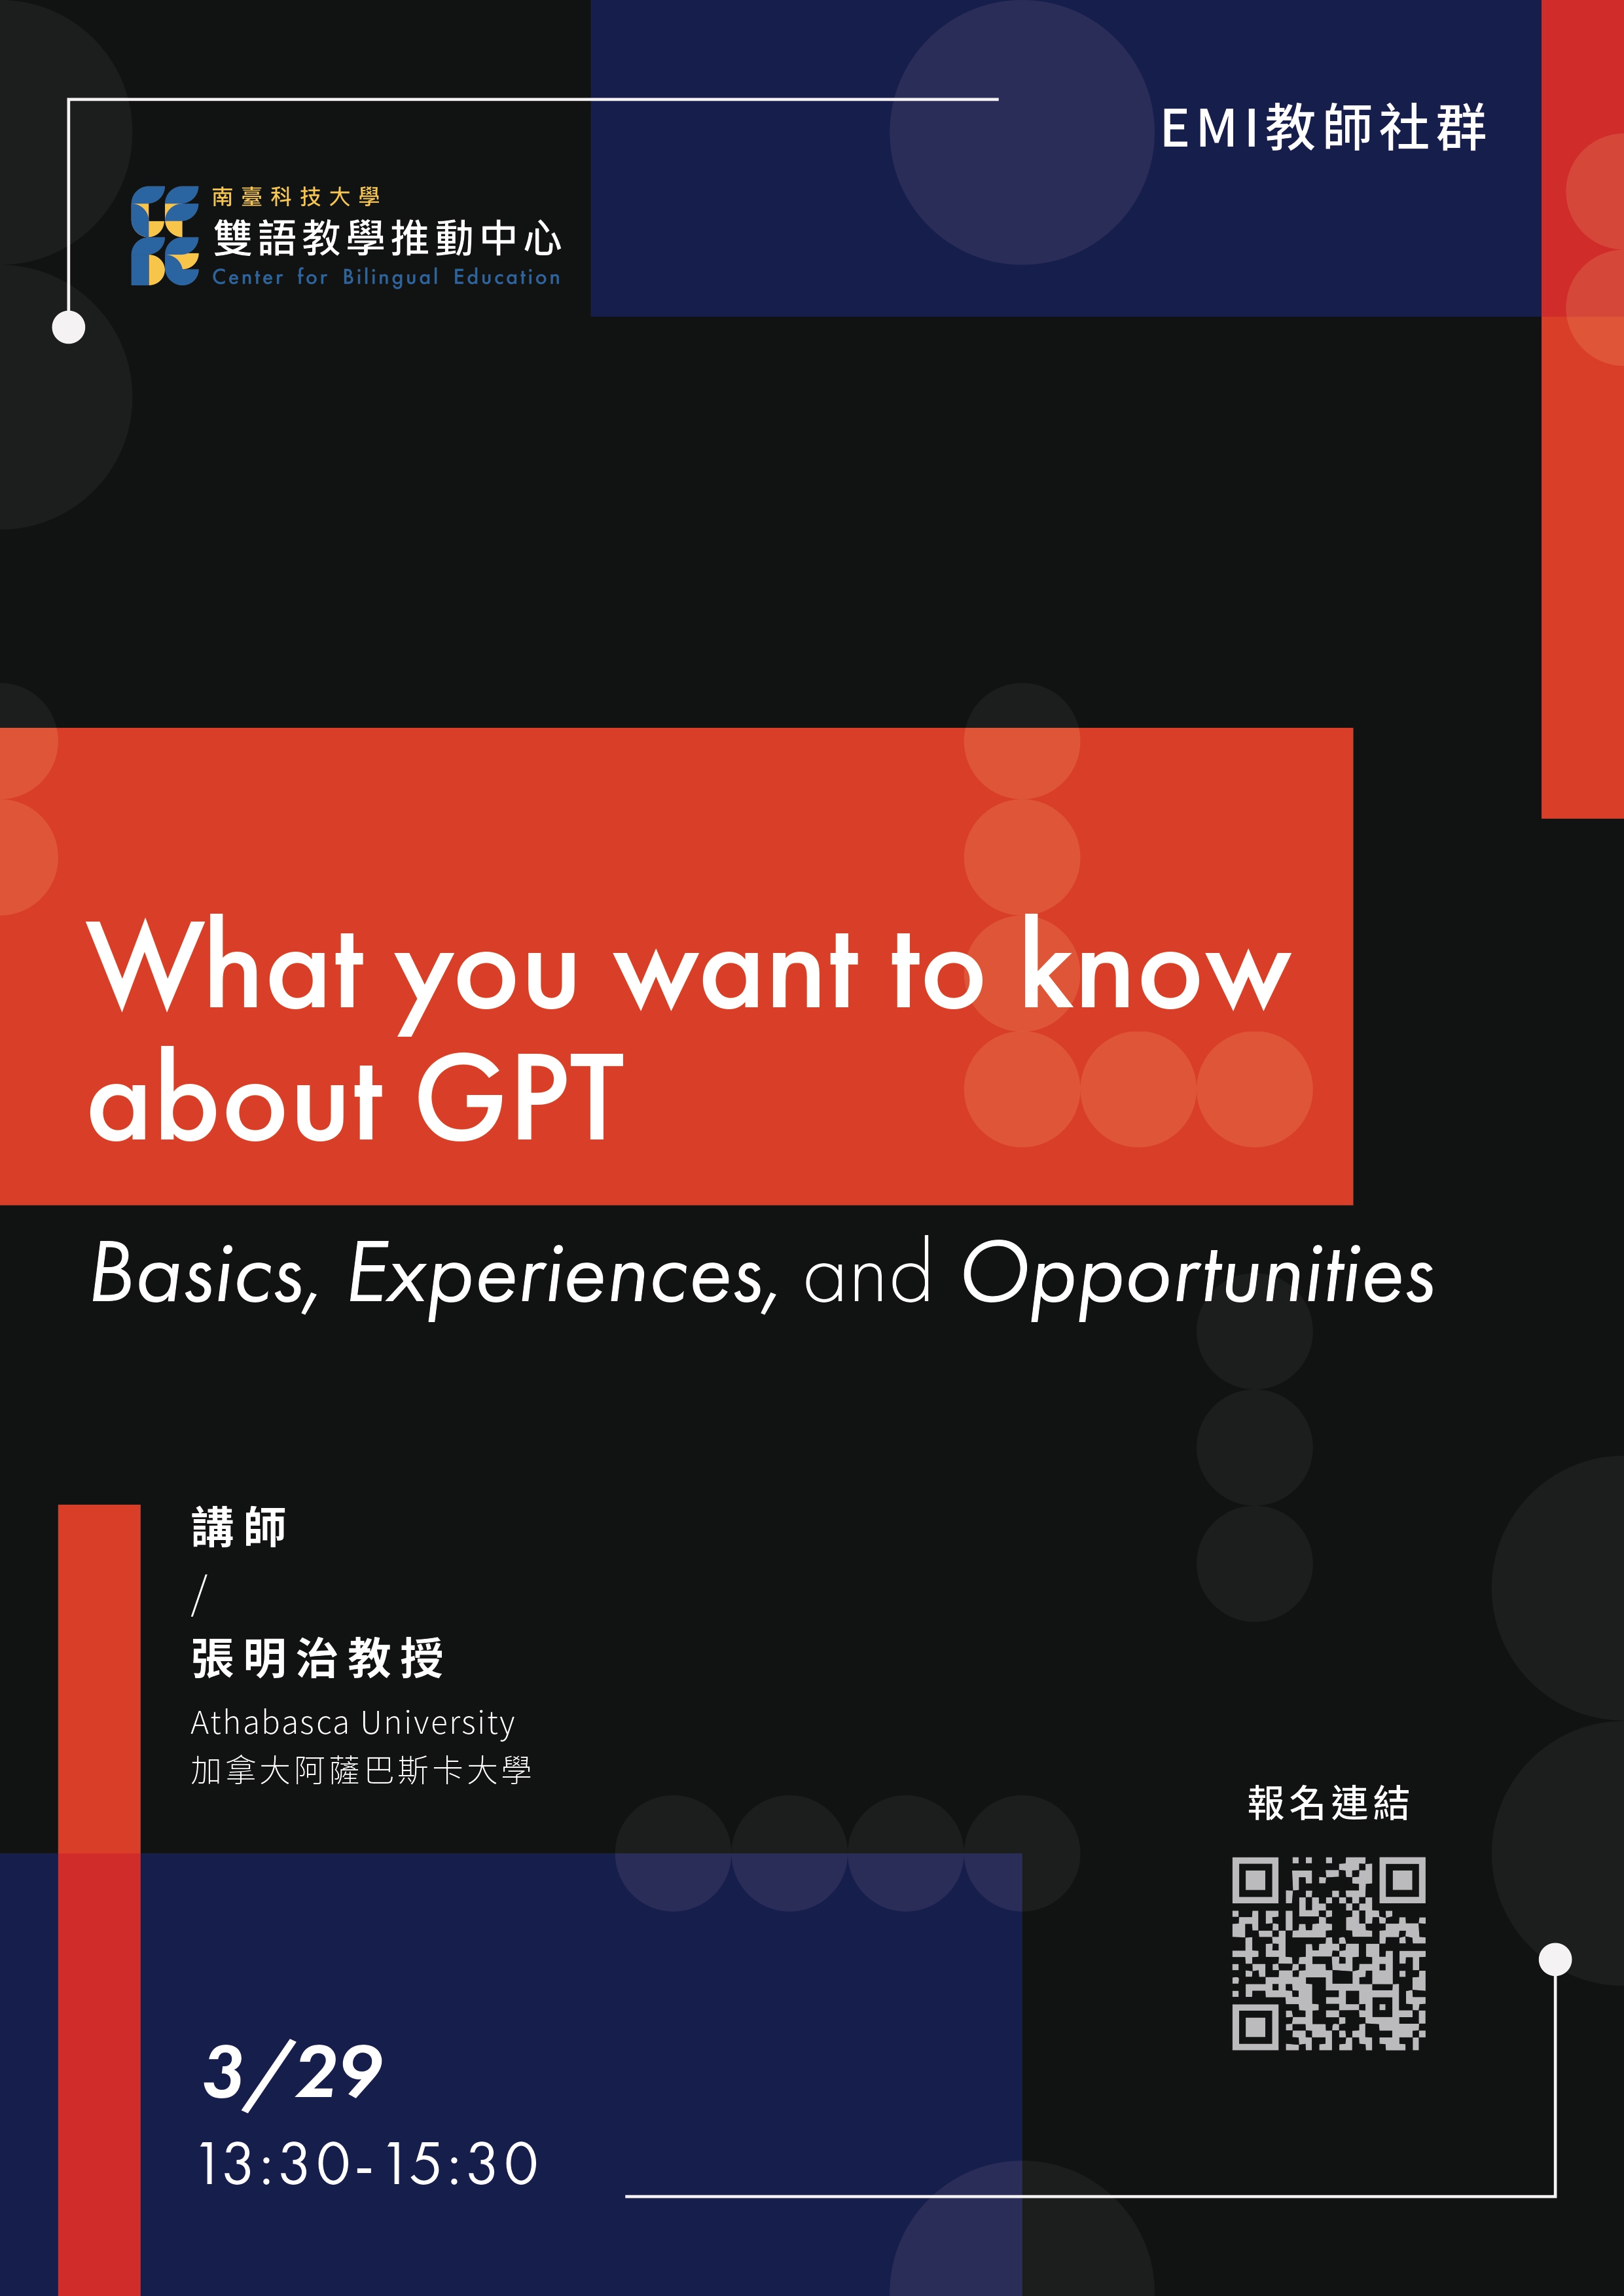 What you want to know about GPT page 0001